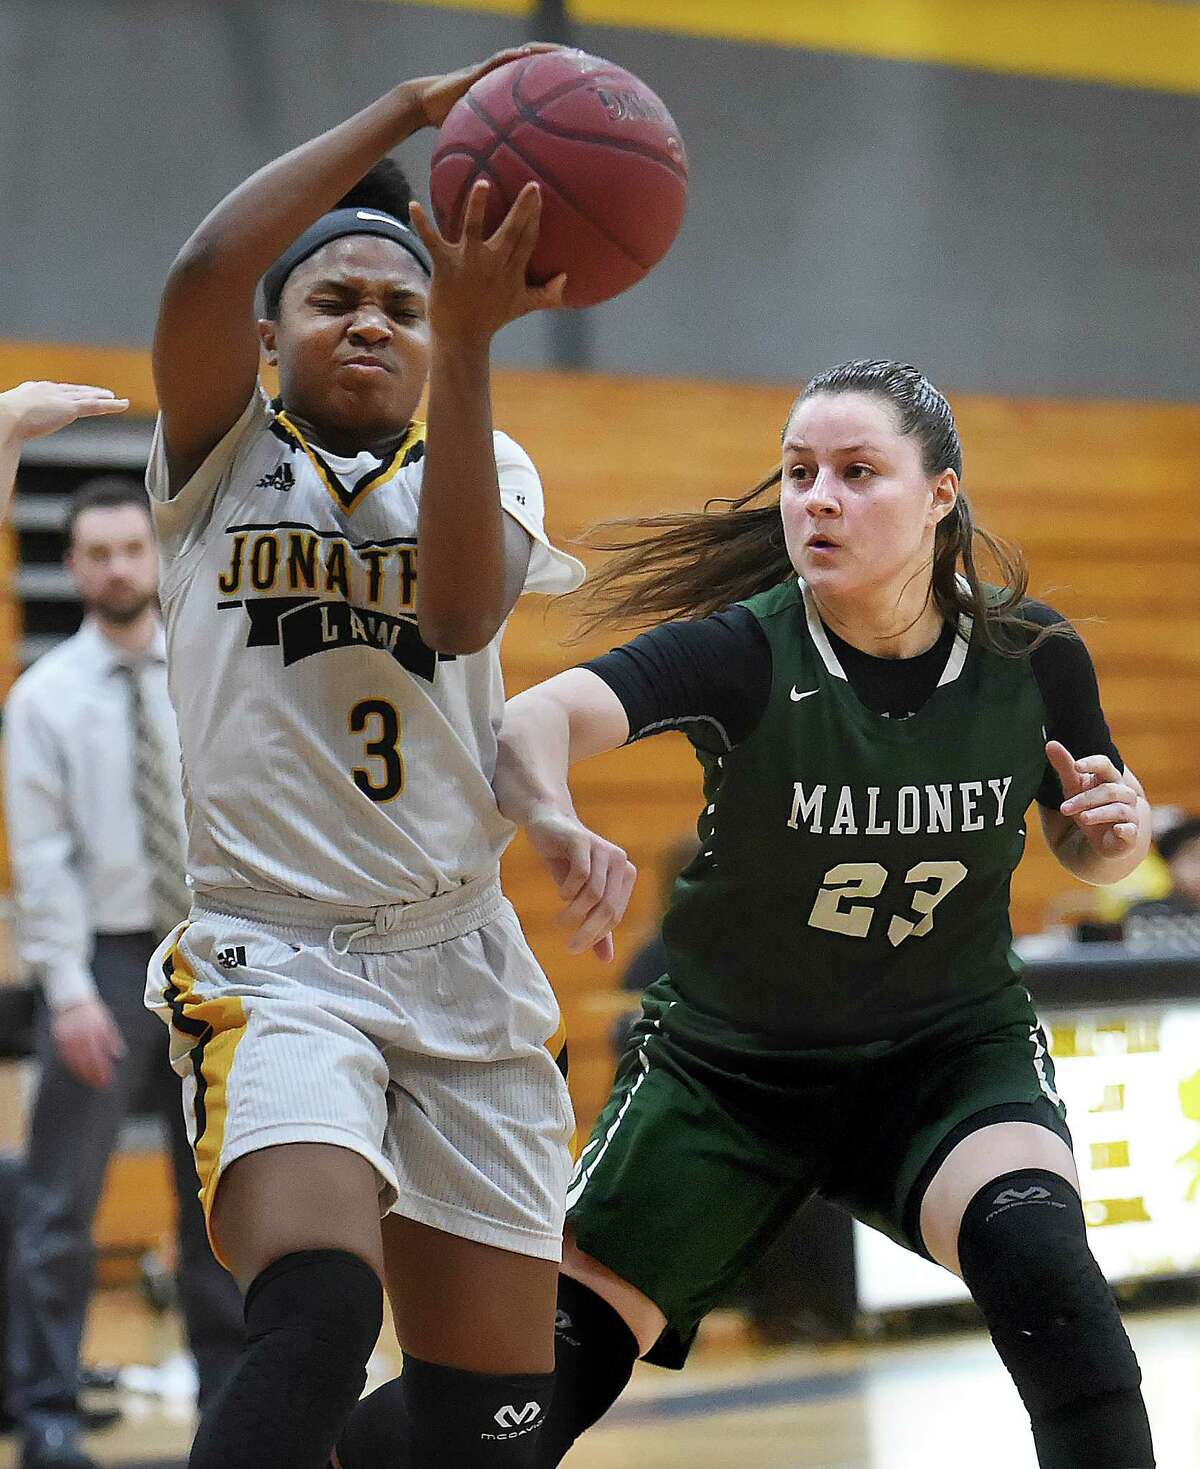 Law junior captain Samara Thacker makes a move on Maloney senior Melanie Polanco, Tuesday, Feb. 27, 2018, in a class L first round matchup of the CIAC state tournament at Jonathan Law High School in Milford. The Lady Lawmen beat Maloney-Meriden, 62-28.